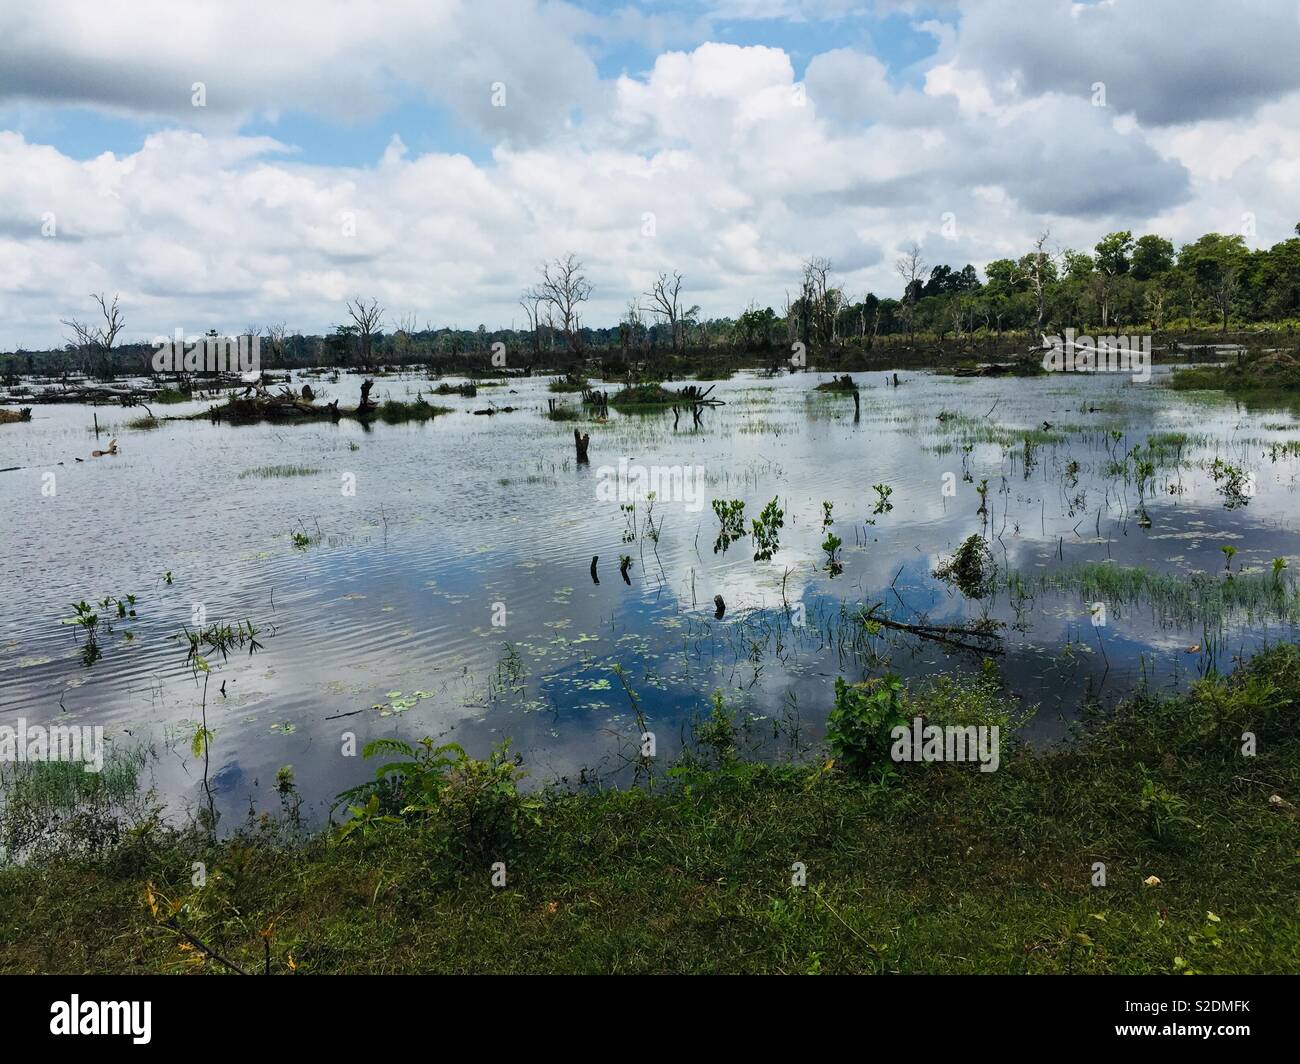 The reflection of the sky can be seen against a swamp lake in Cambodia Stock Photo